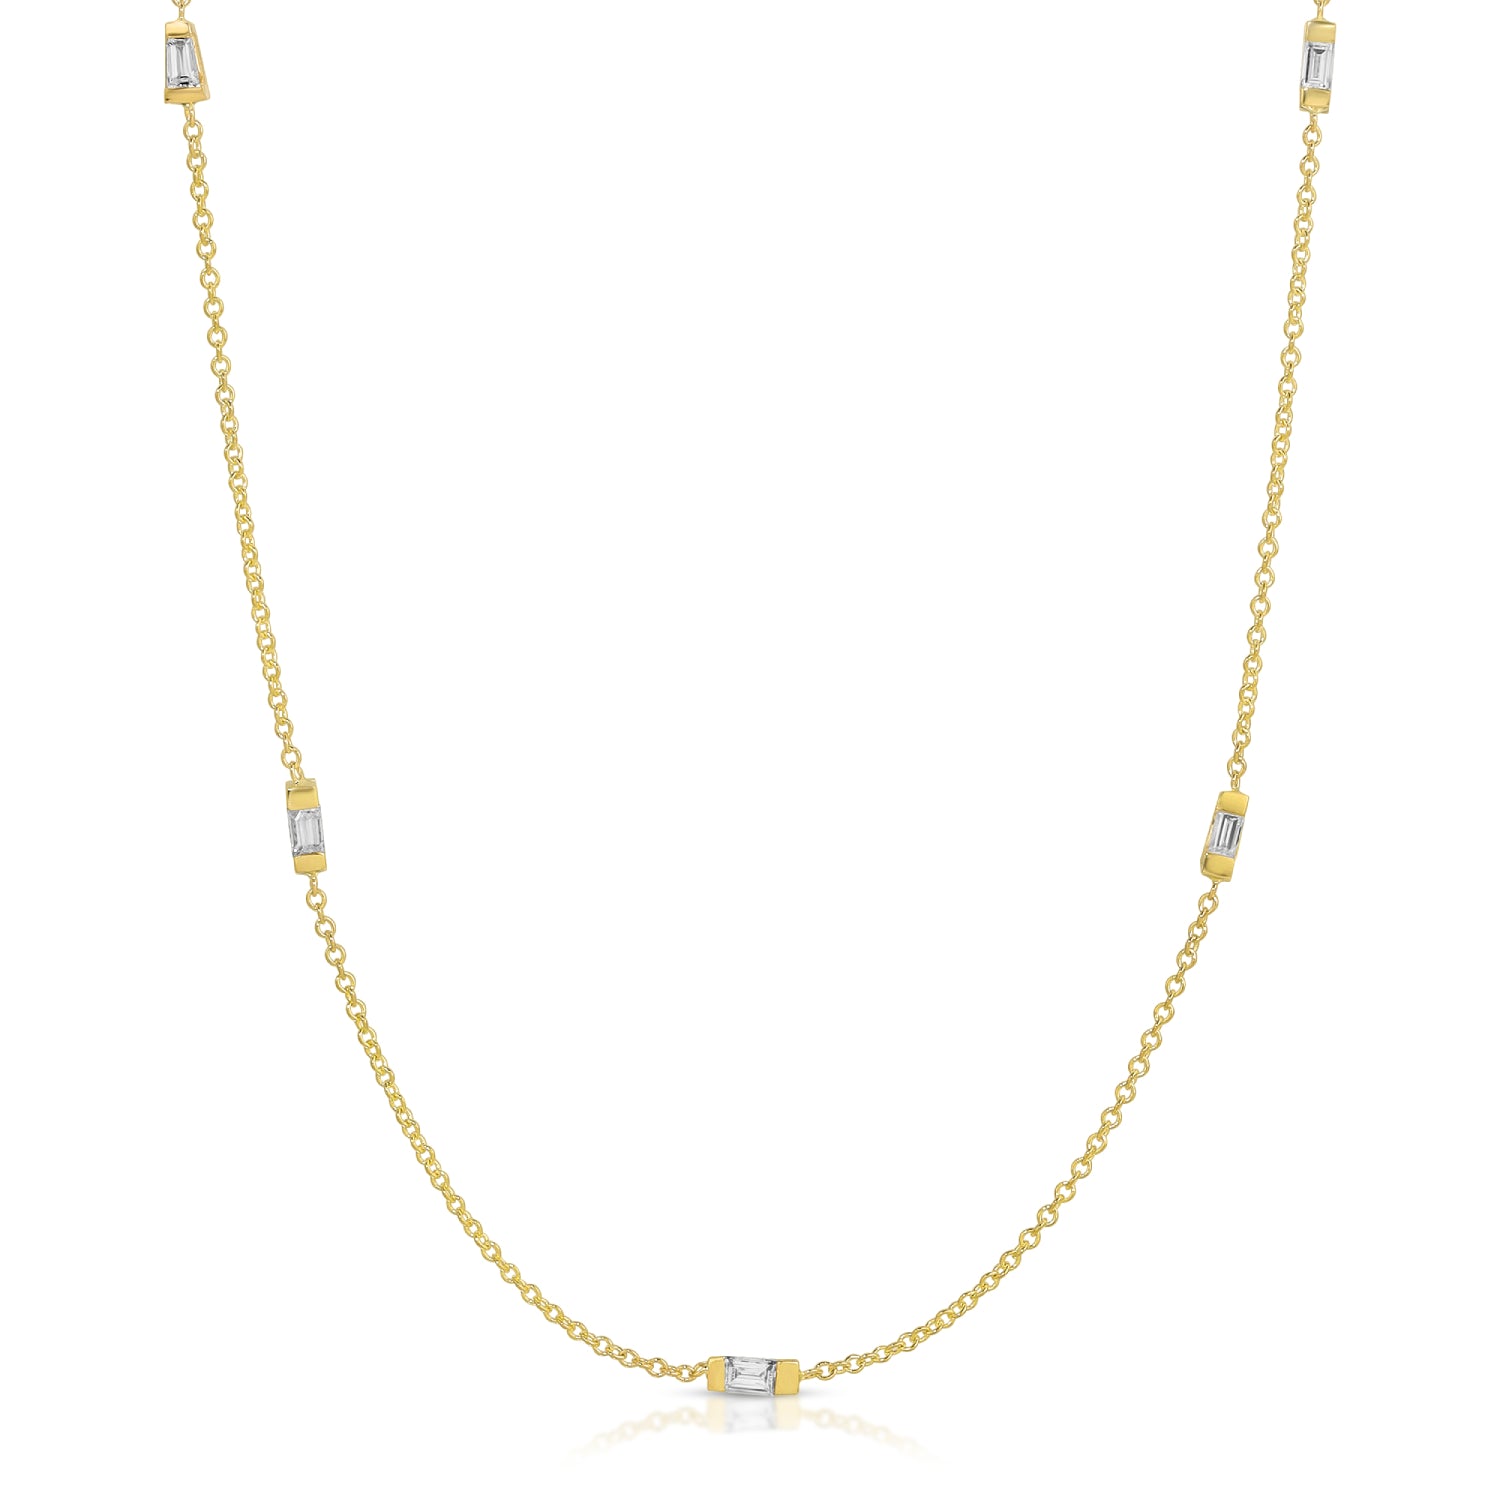 Mixed Baguette Cut Diamond Station Necklace in Yellow Gold